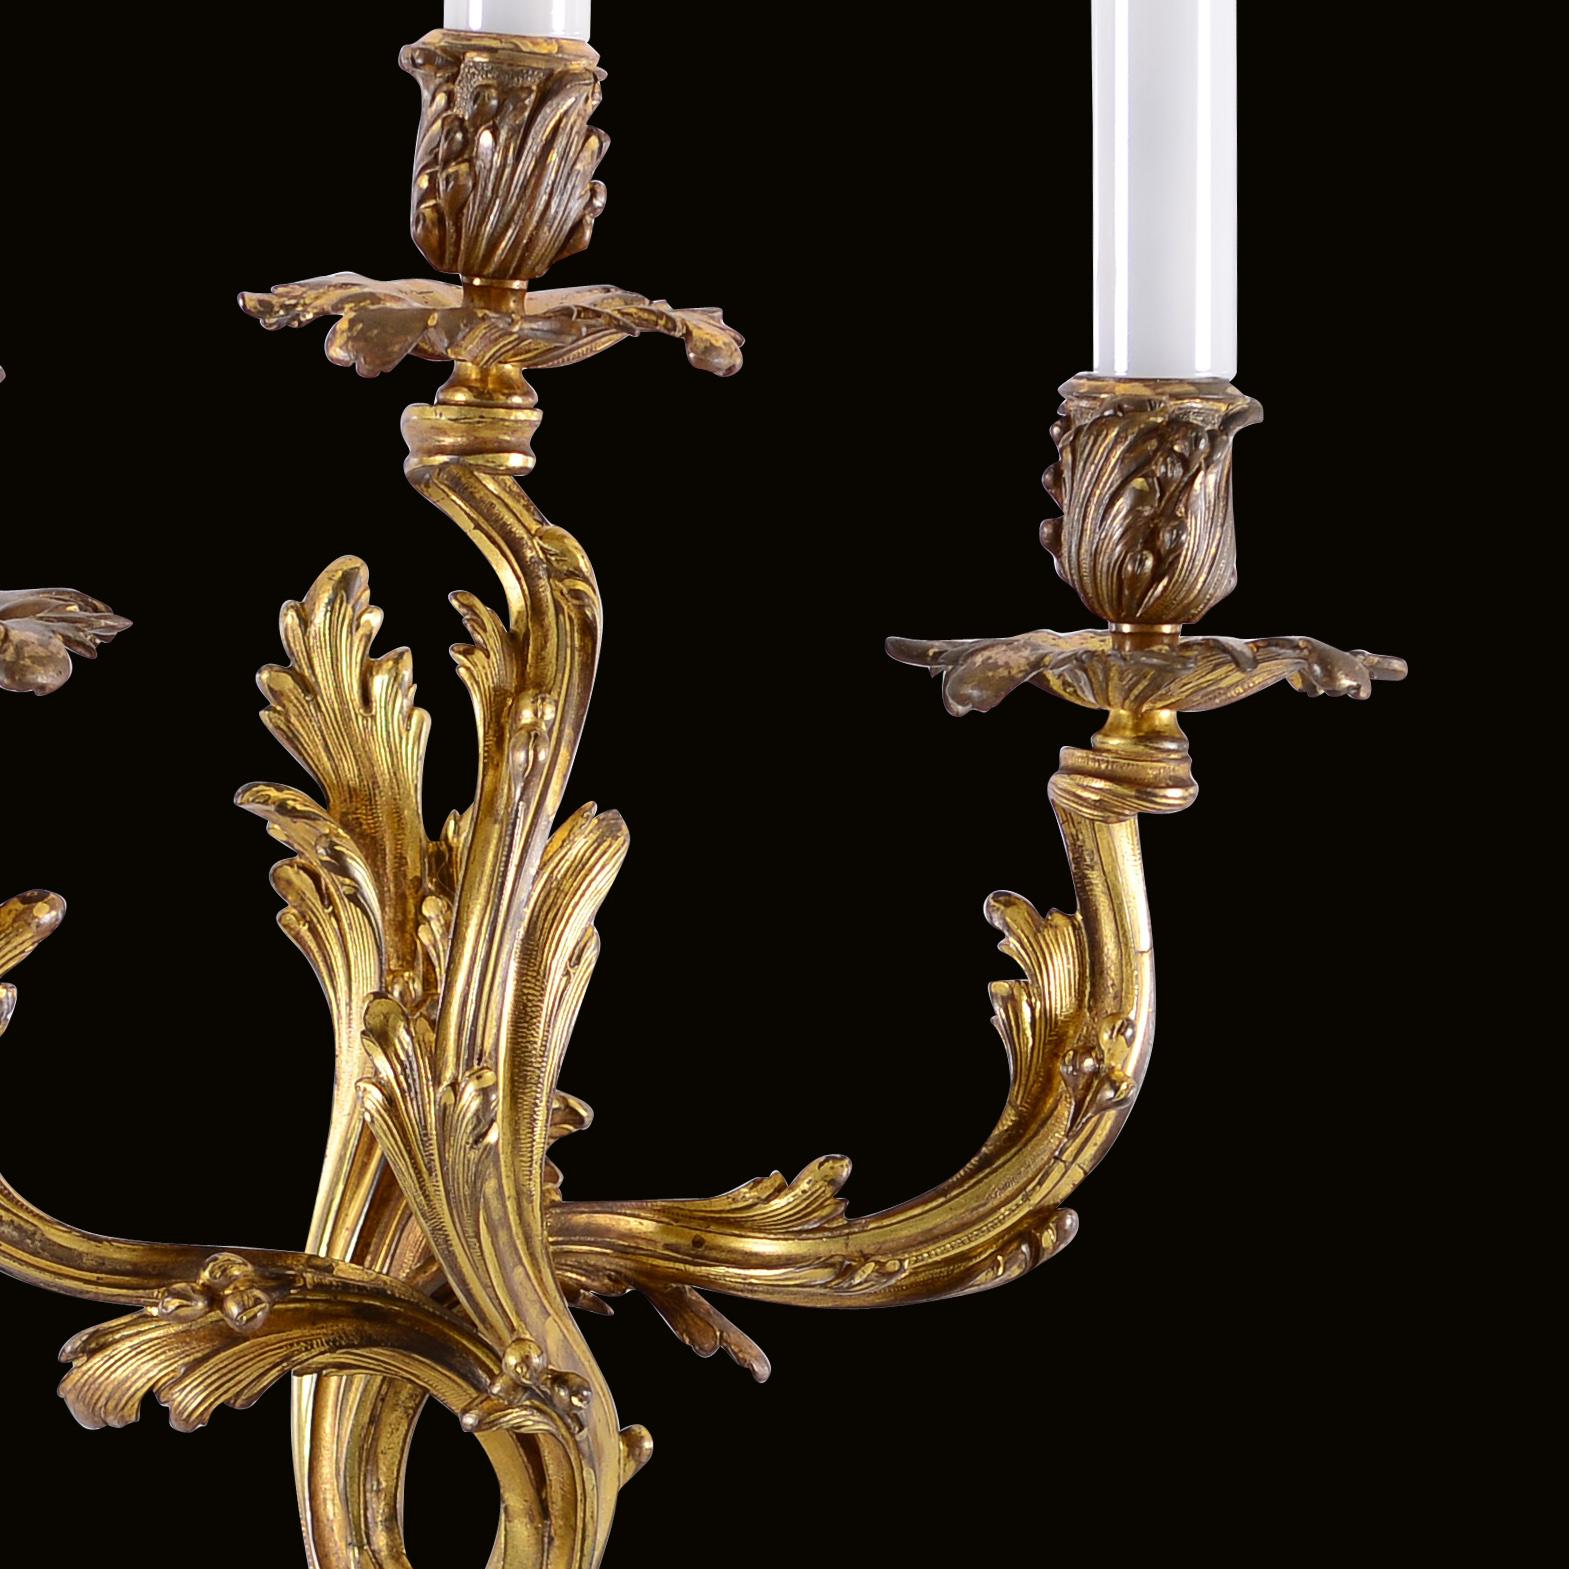 Casted, chased and fire-gilded bronze, very elaborately works, originally with candles, later electrified.